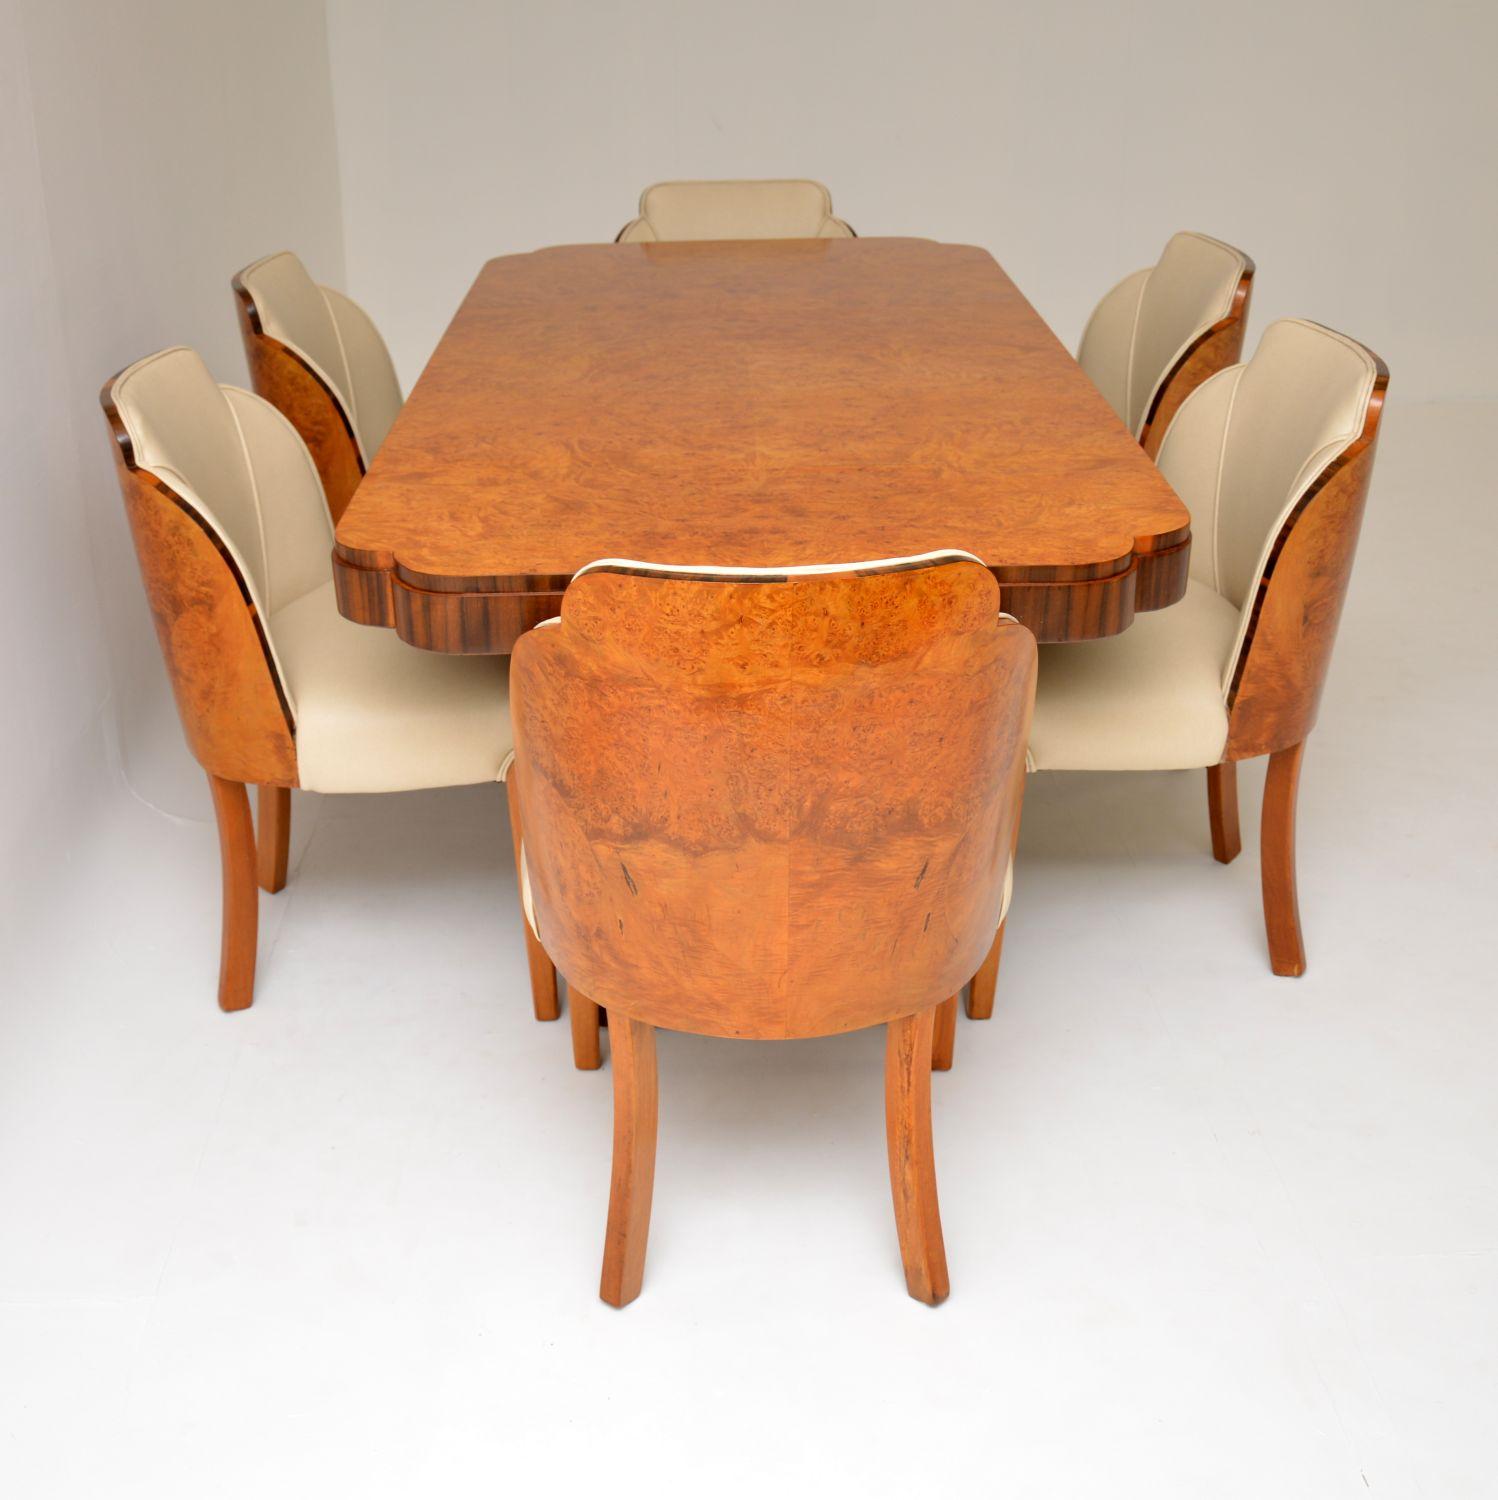 British Art Deco Burr Walnut Dining Table & Cloud Back Chairs by Epstein